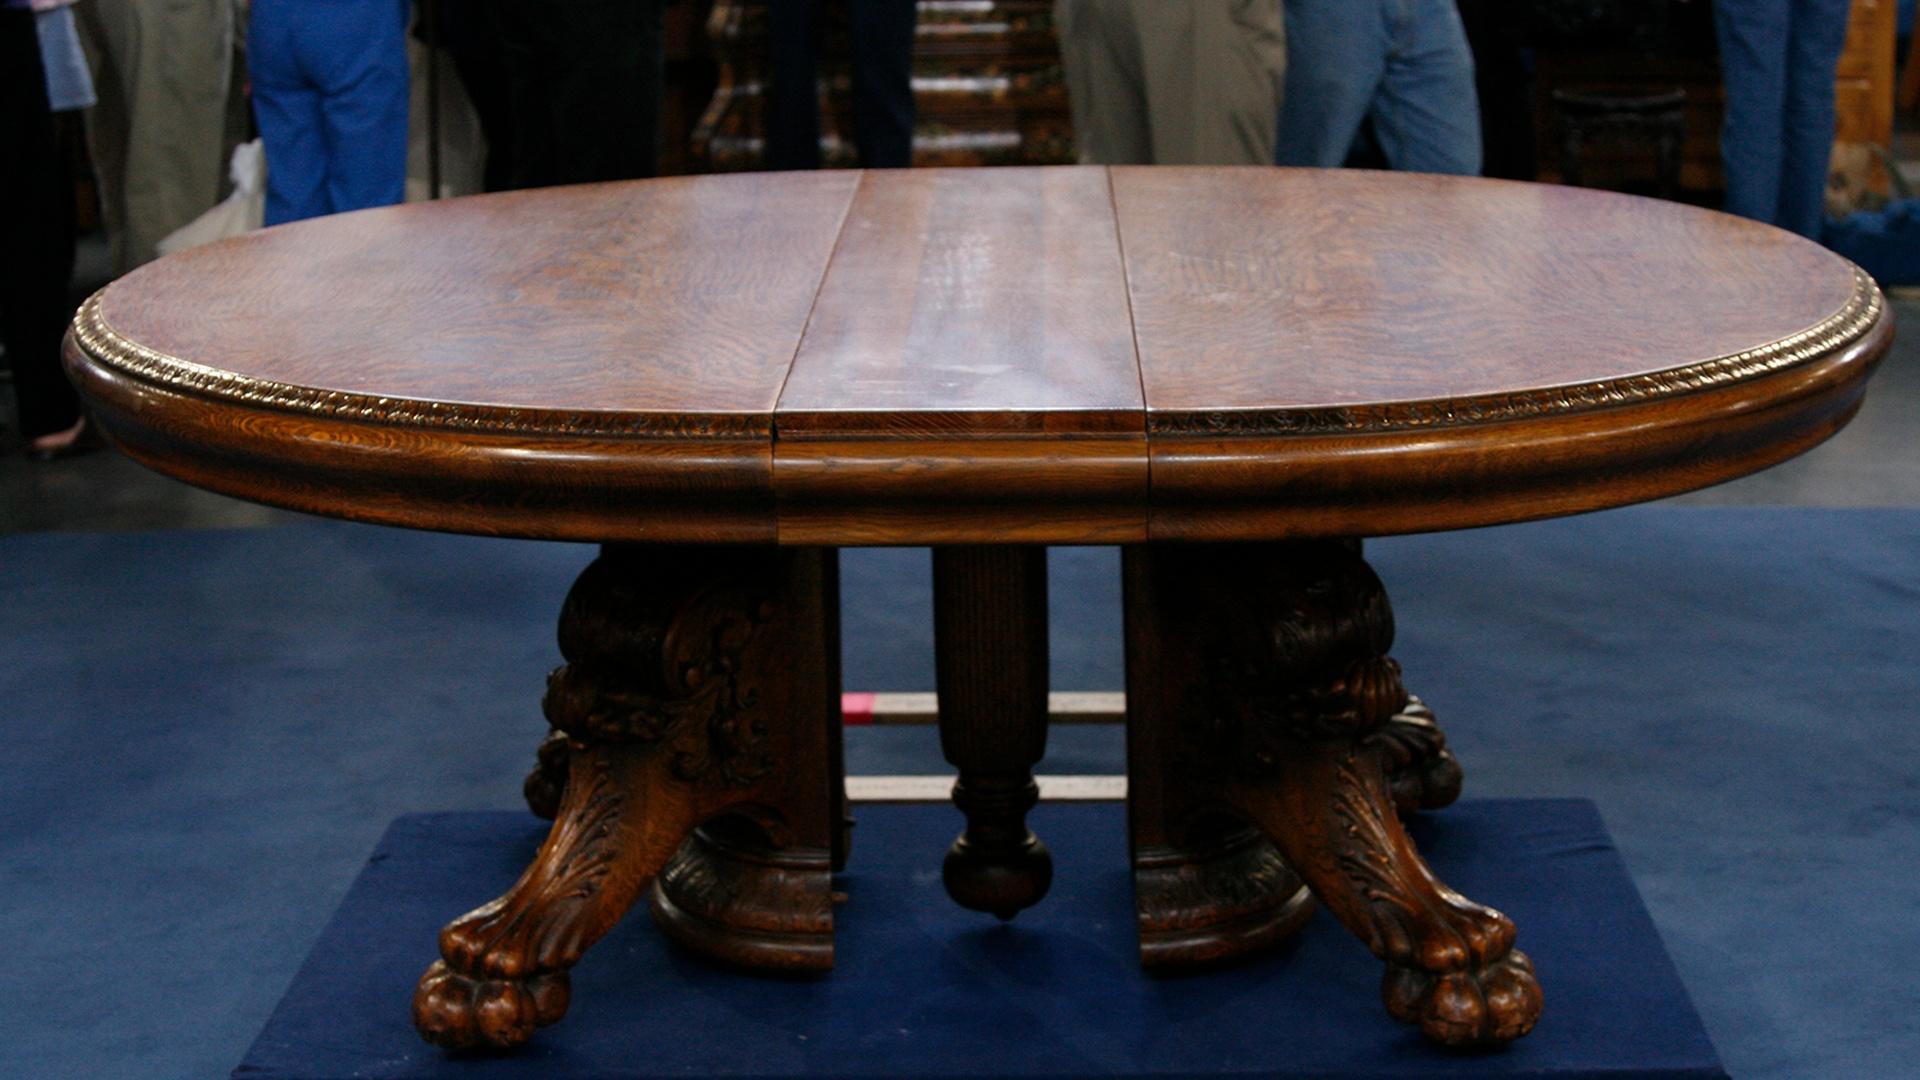 Dining Room Table Centrepiece Antiques Roadshow